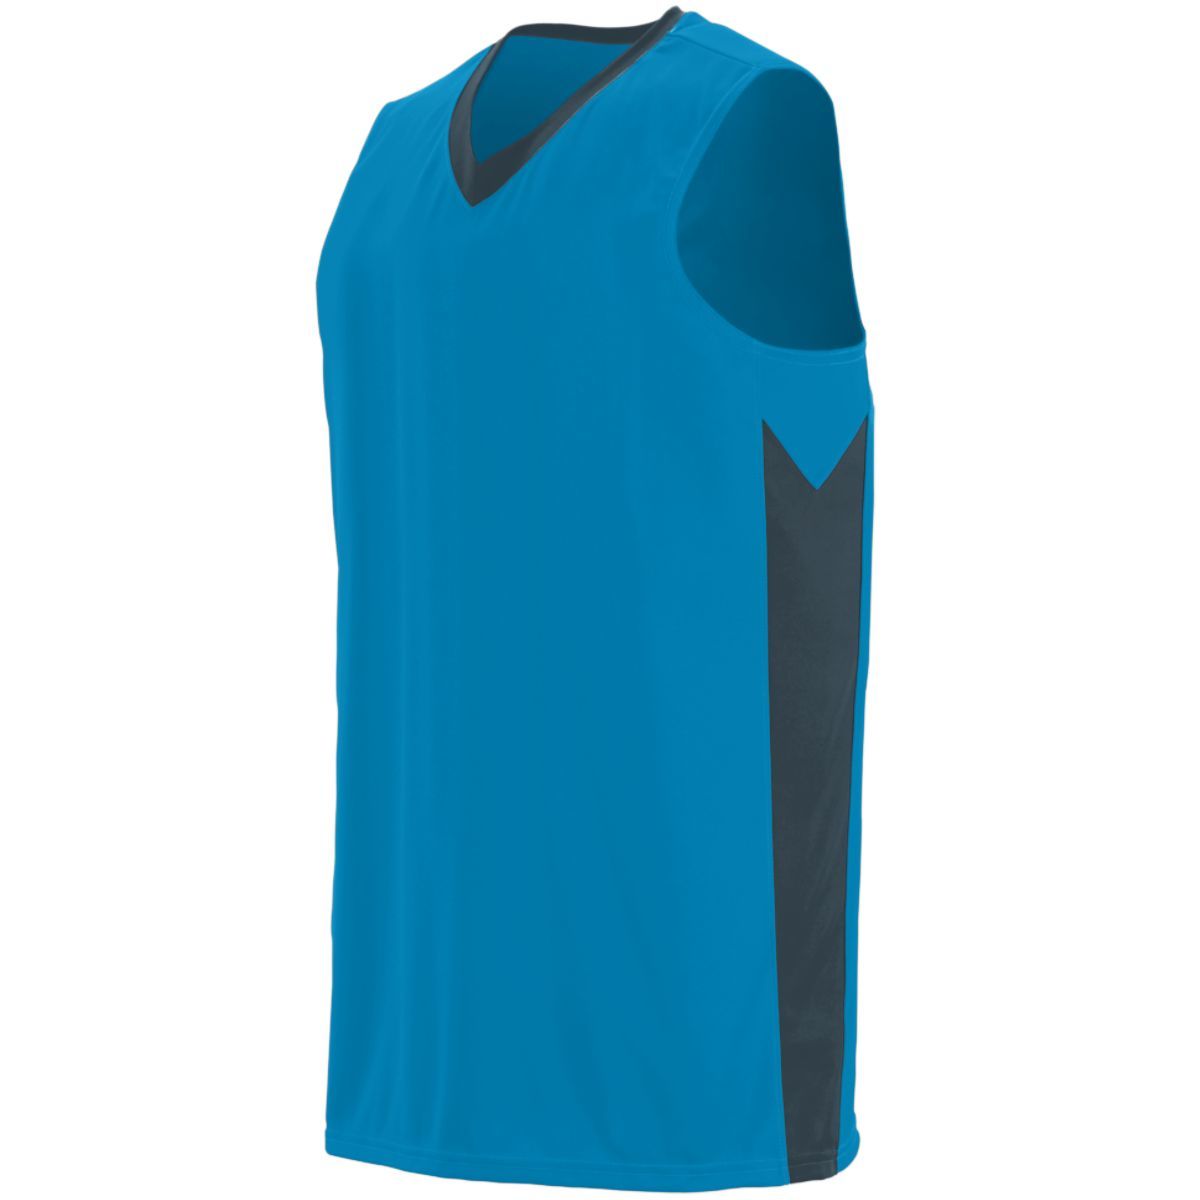 Augusta Sportswear Youth Block Out Jersey in Power Blue/Slate  -Part of the Youth, Youth-Jersey, Augusta-Products, Basketball, Shirts, All-Sports, All-Sports-1 product lines at KanaleyCreations.com